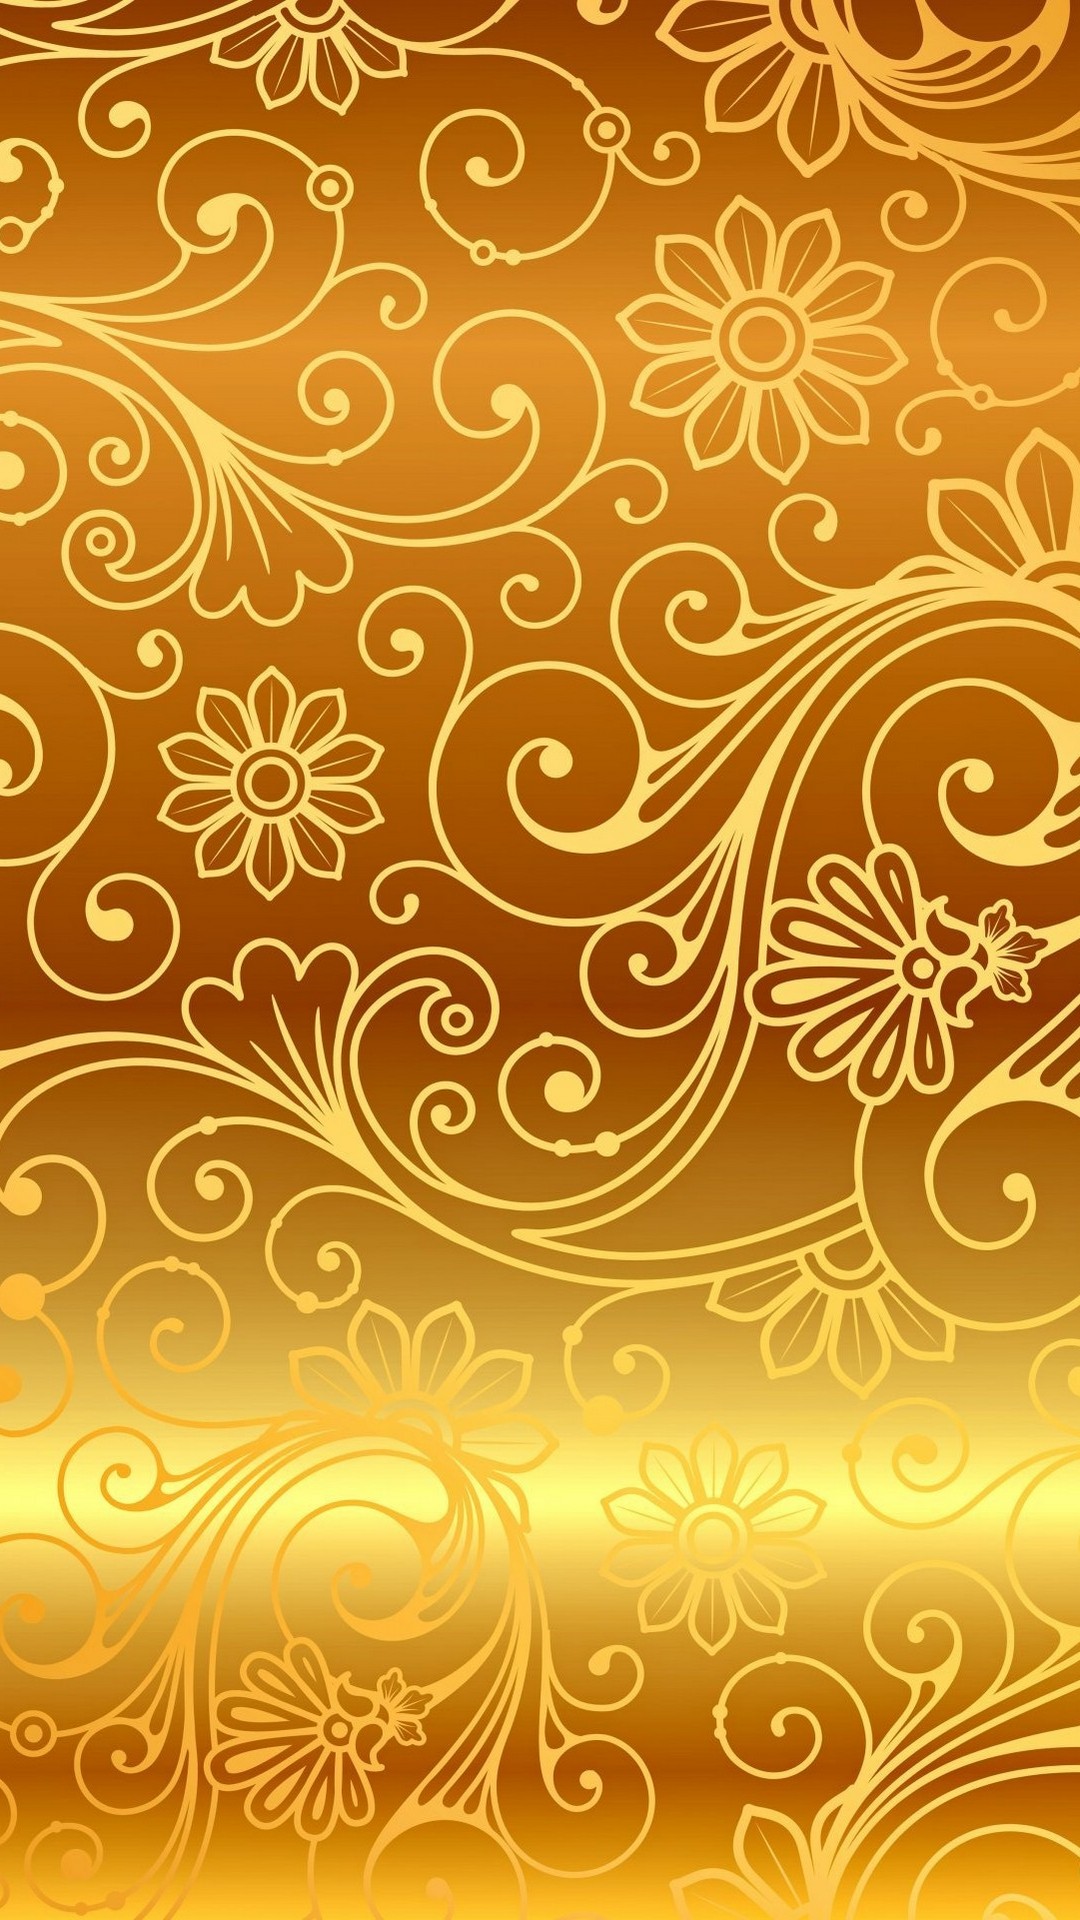 Wallpapers Gold Designs High Resolution 1080X1920